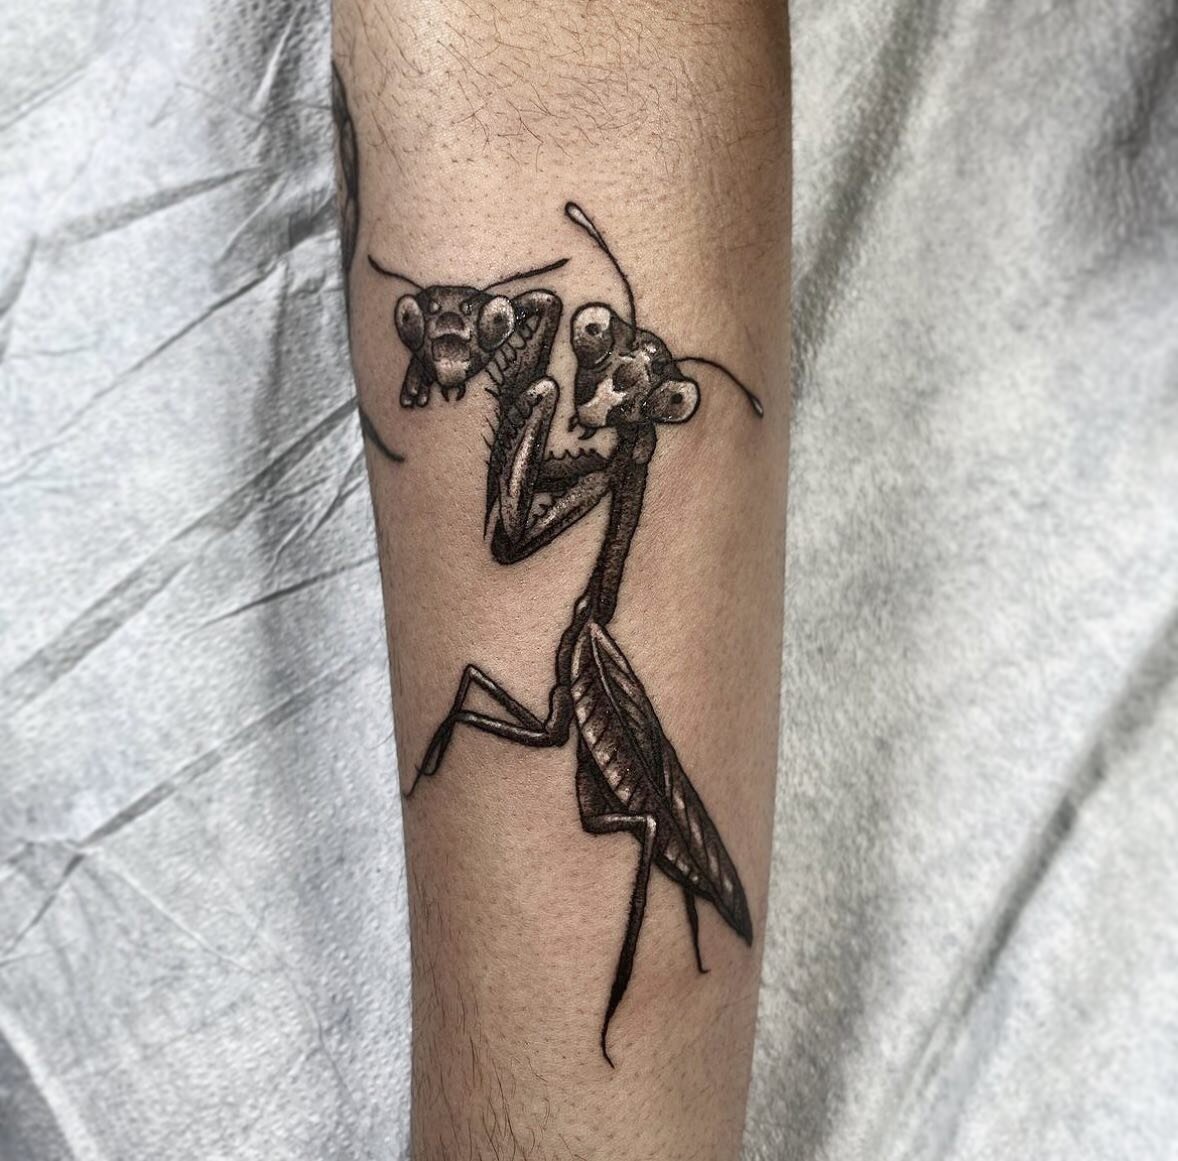 Mantis tattoo meaning